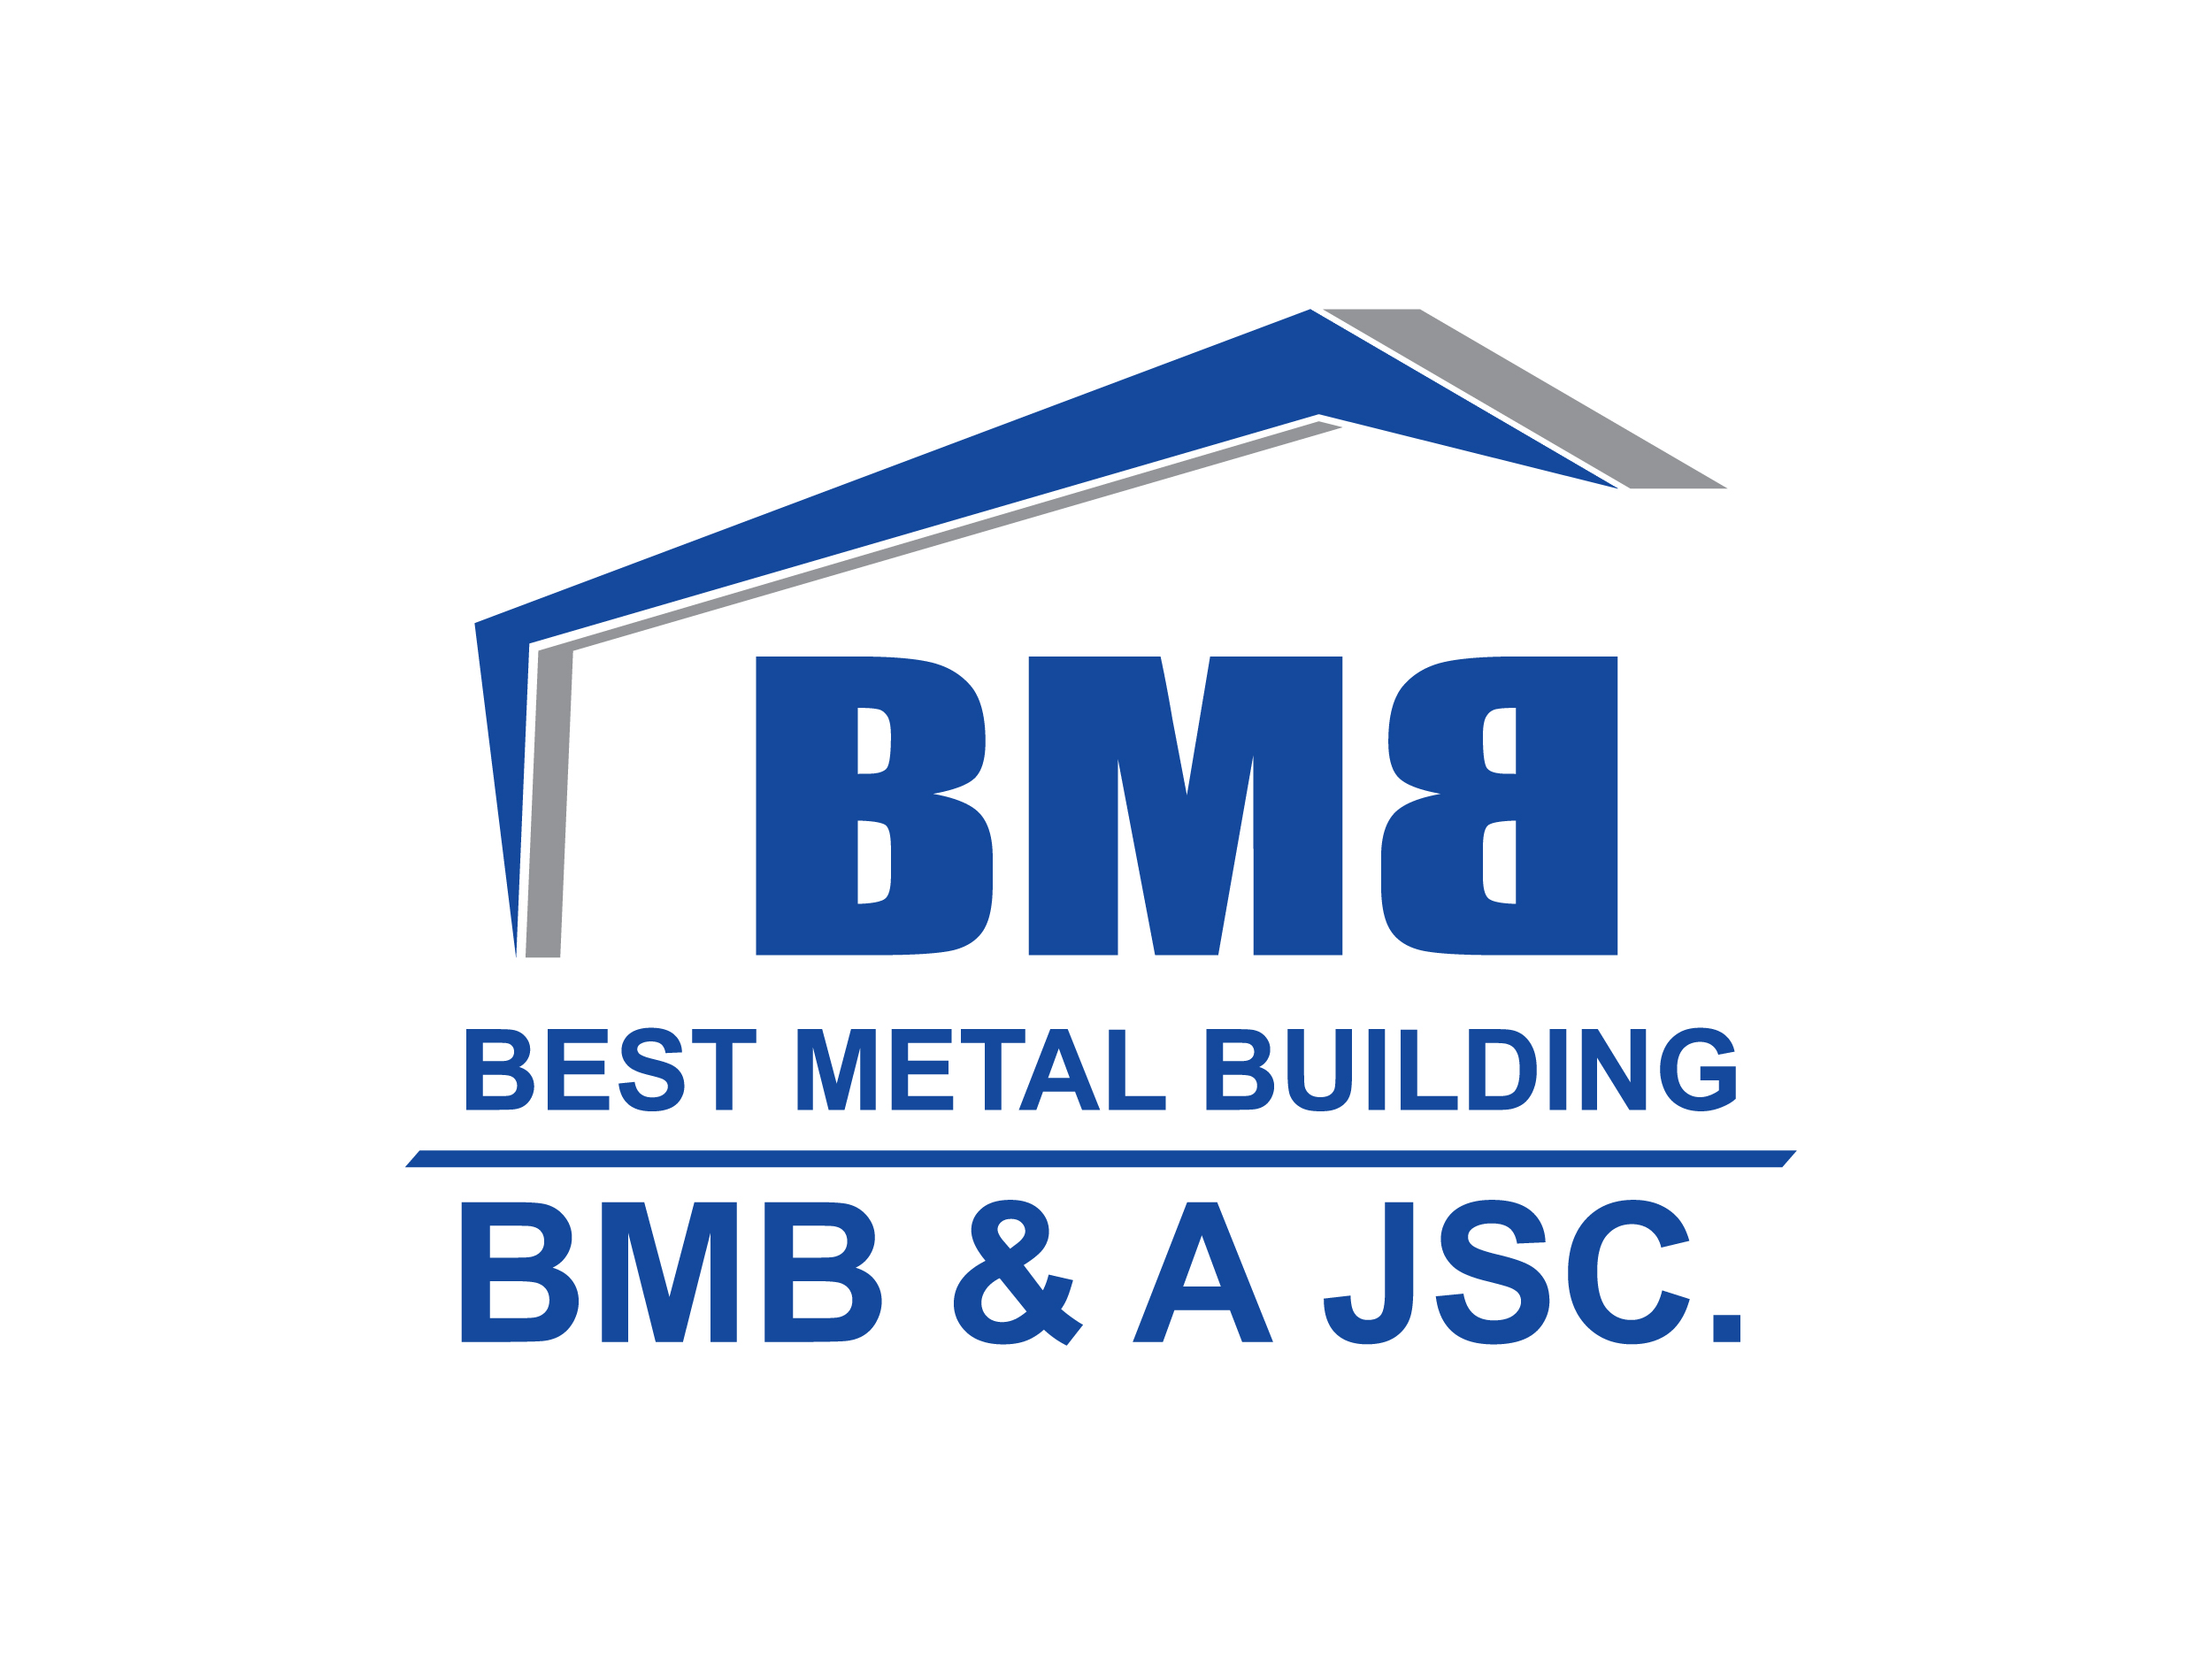 Contractor of pre-engineered steel buildings with quality mezzanine